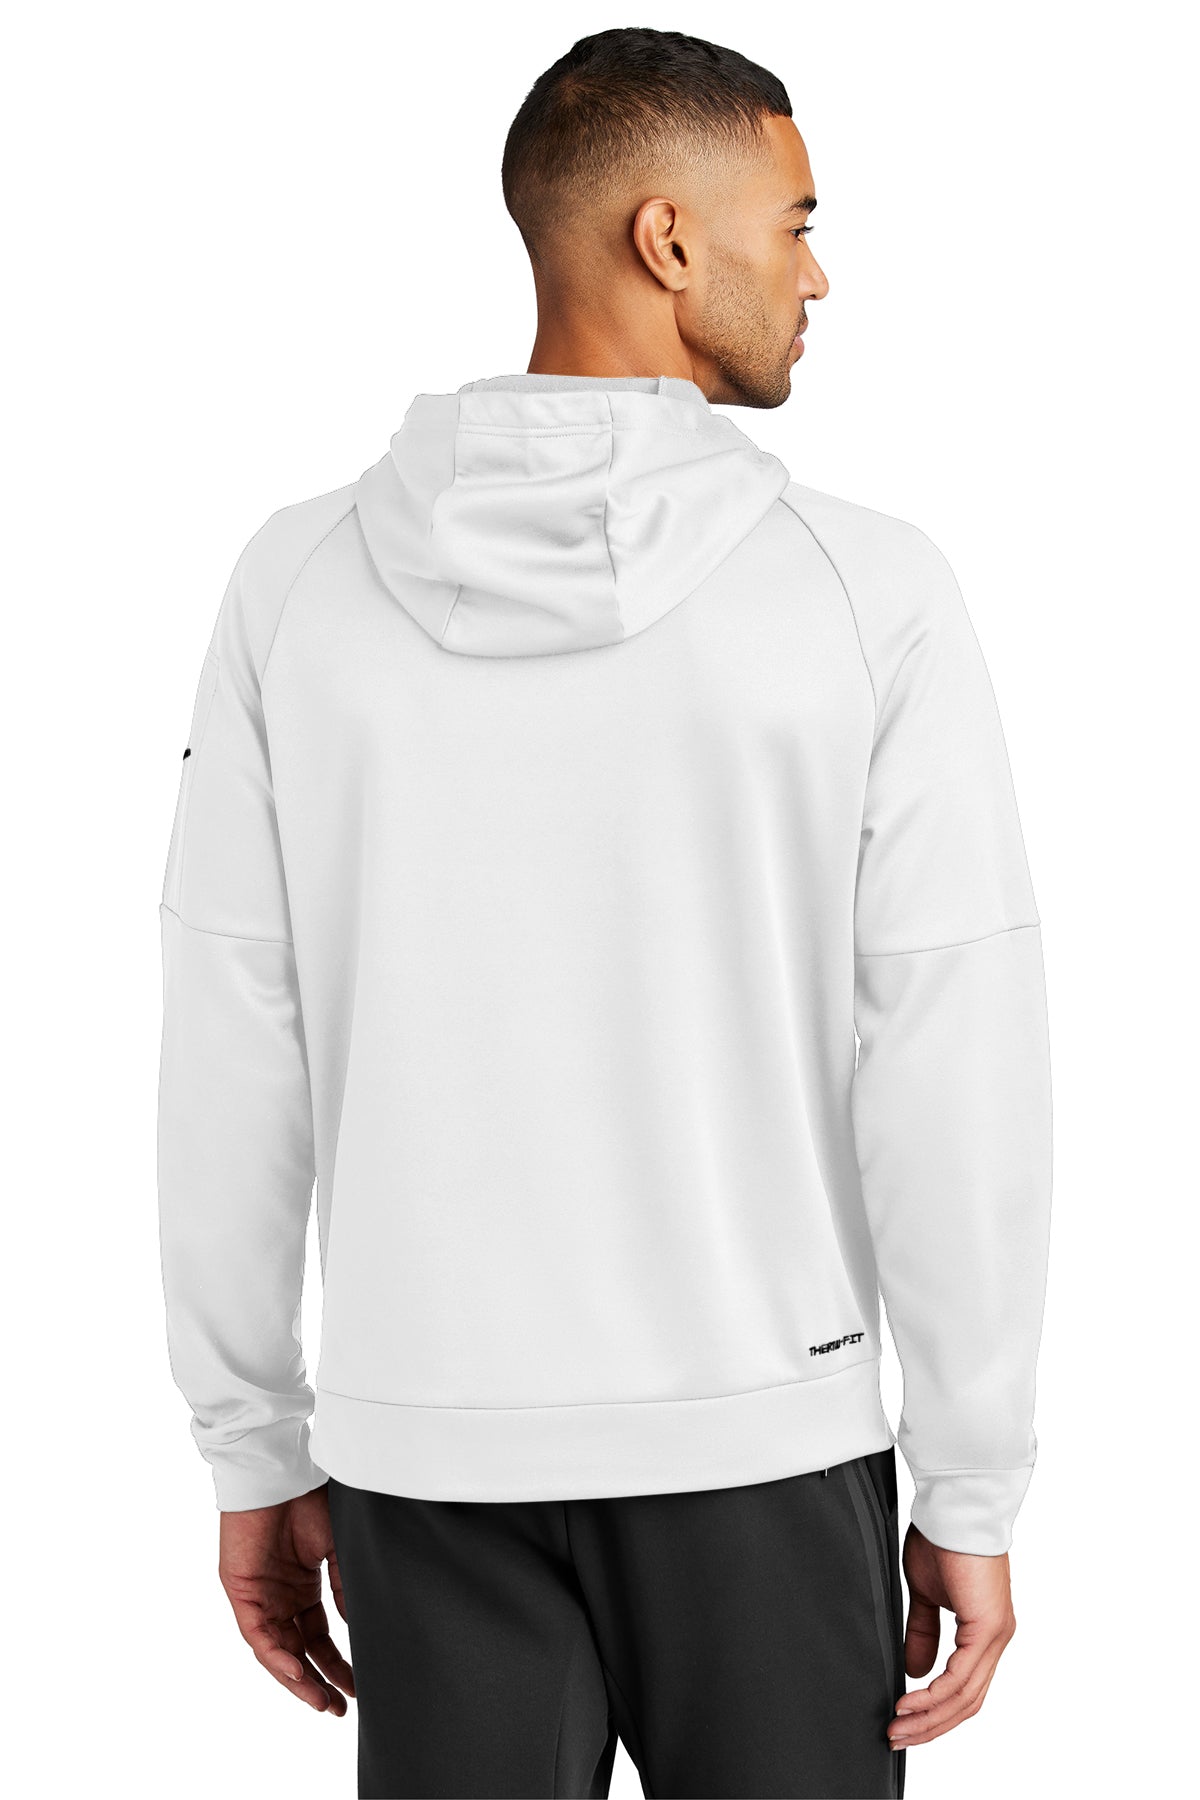 Nike Therma-FIT Pocket Pullover Branded Hoodies, White